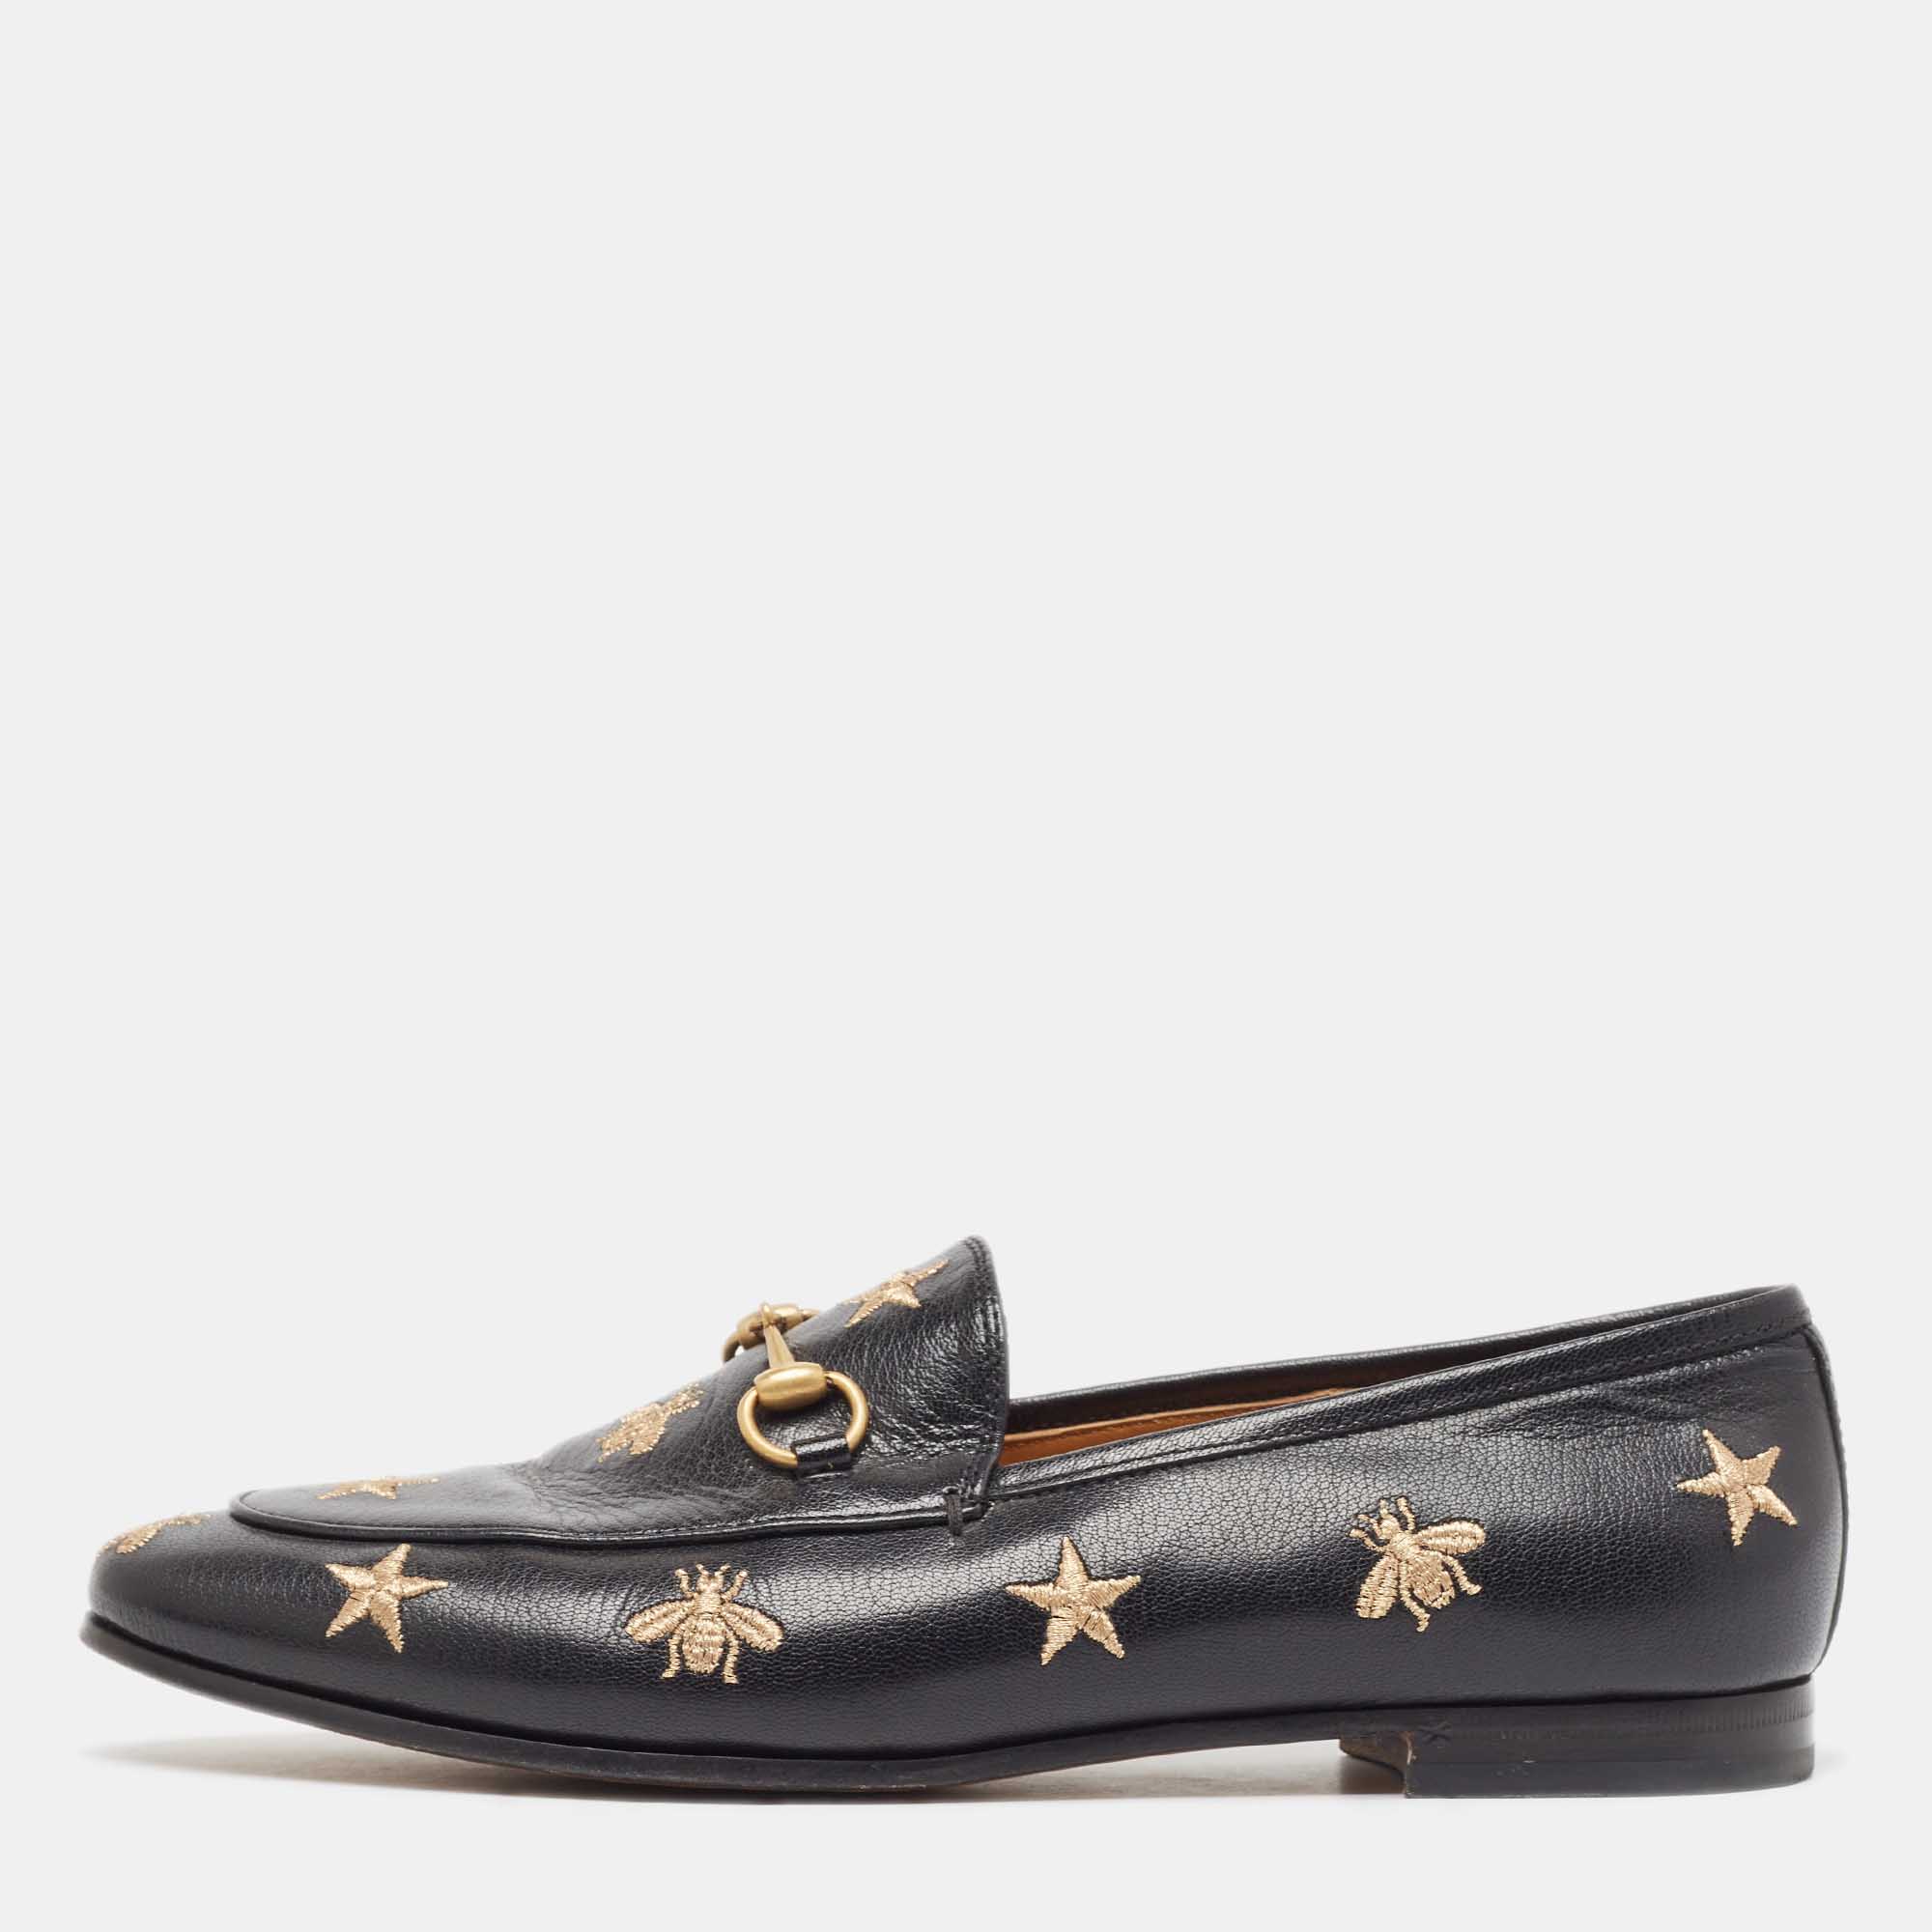 Gucci black leather jordaan loafers size 39